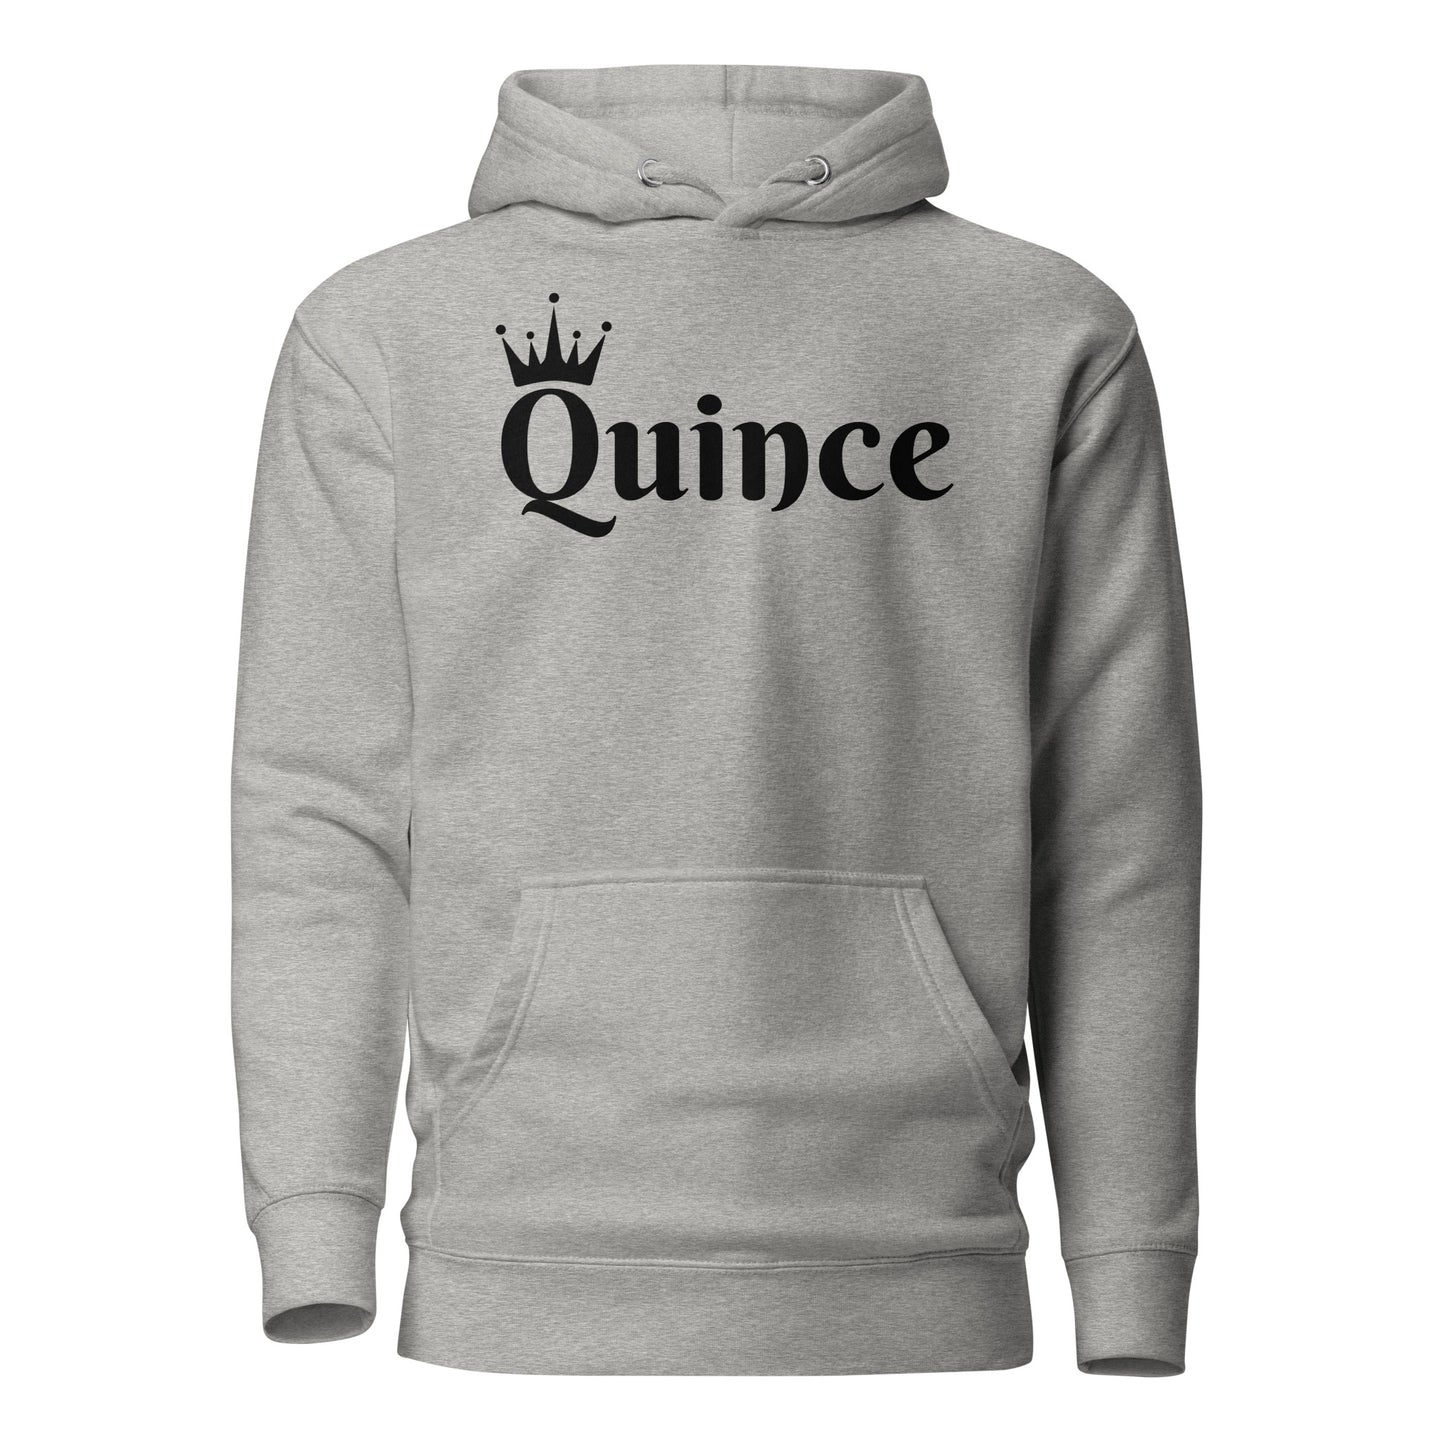 Quince Hoodie